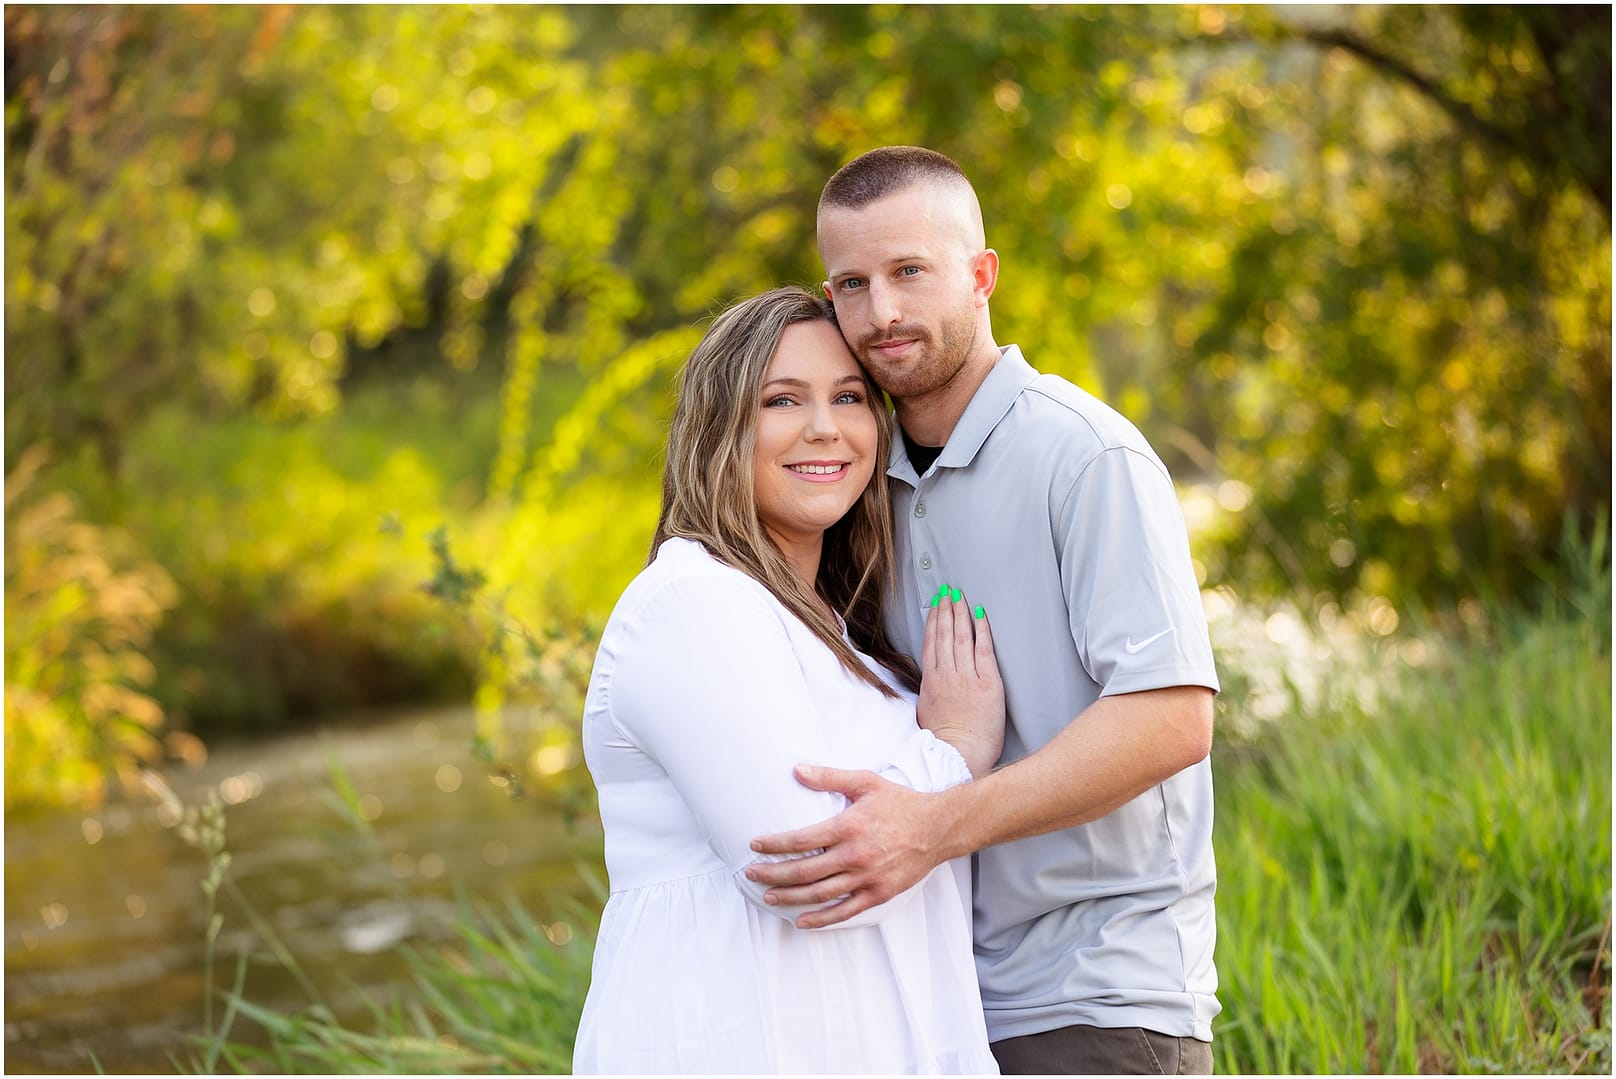 Soon to be parents take portrait by river. Photo by Tiffany Hix Photography.